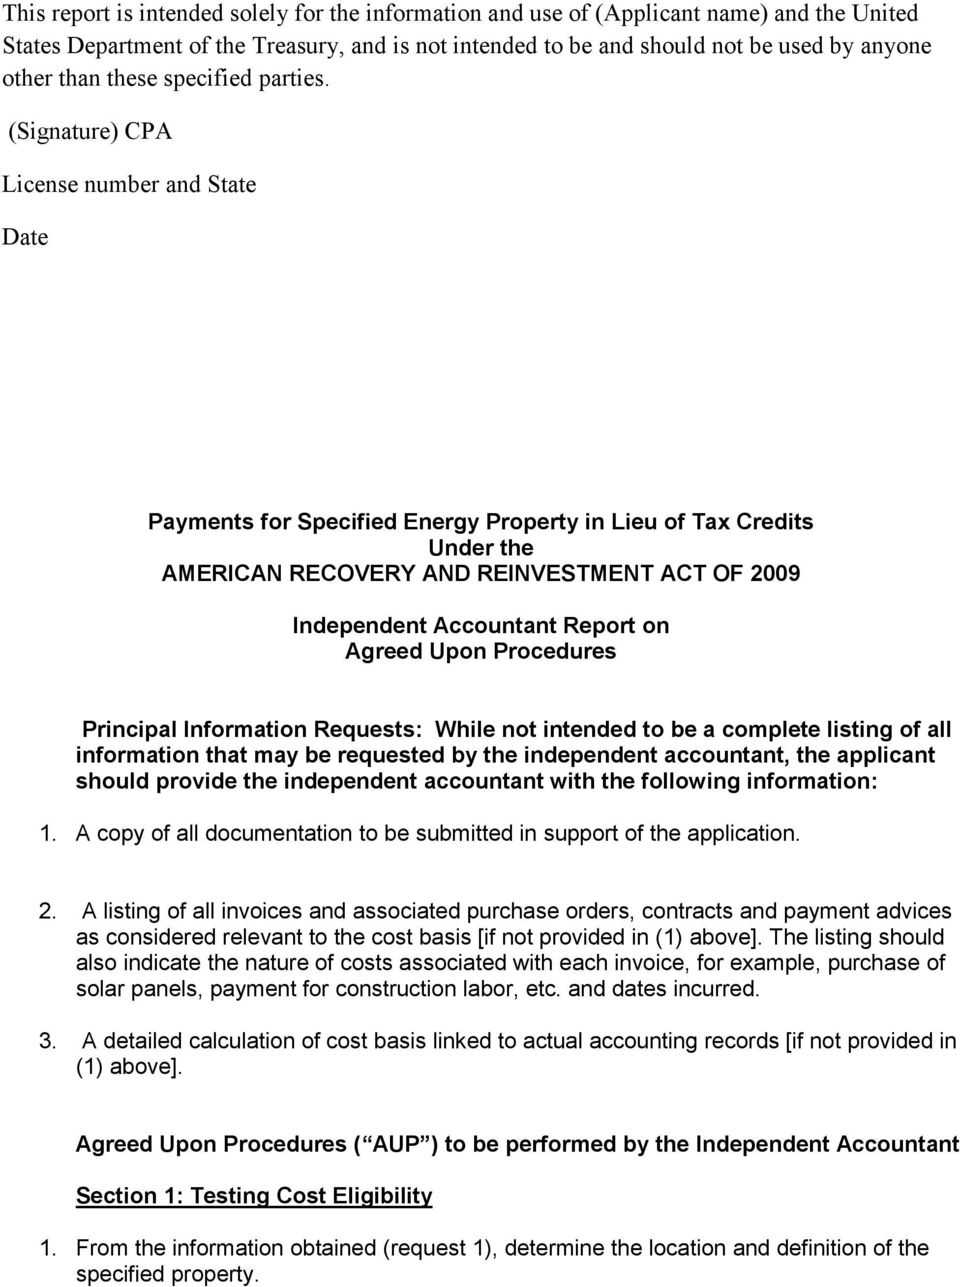 Payments For Specified Energy Property In Lieu Of Tax Inside Agreed Upon Procedures Report Template